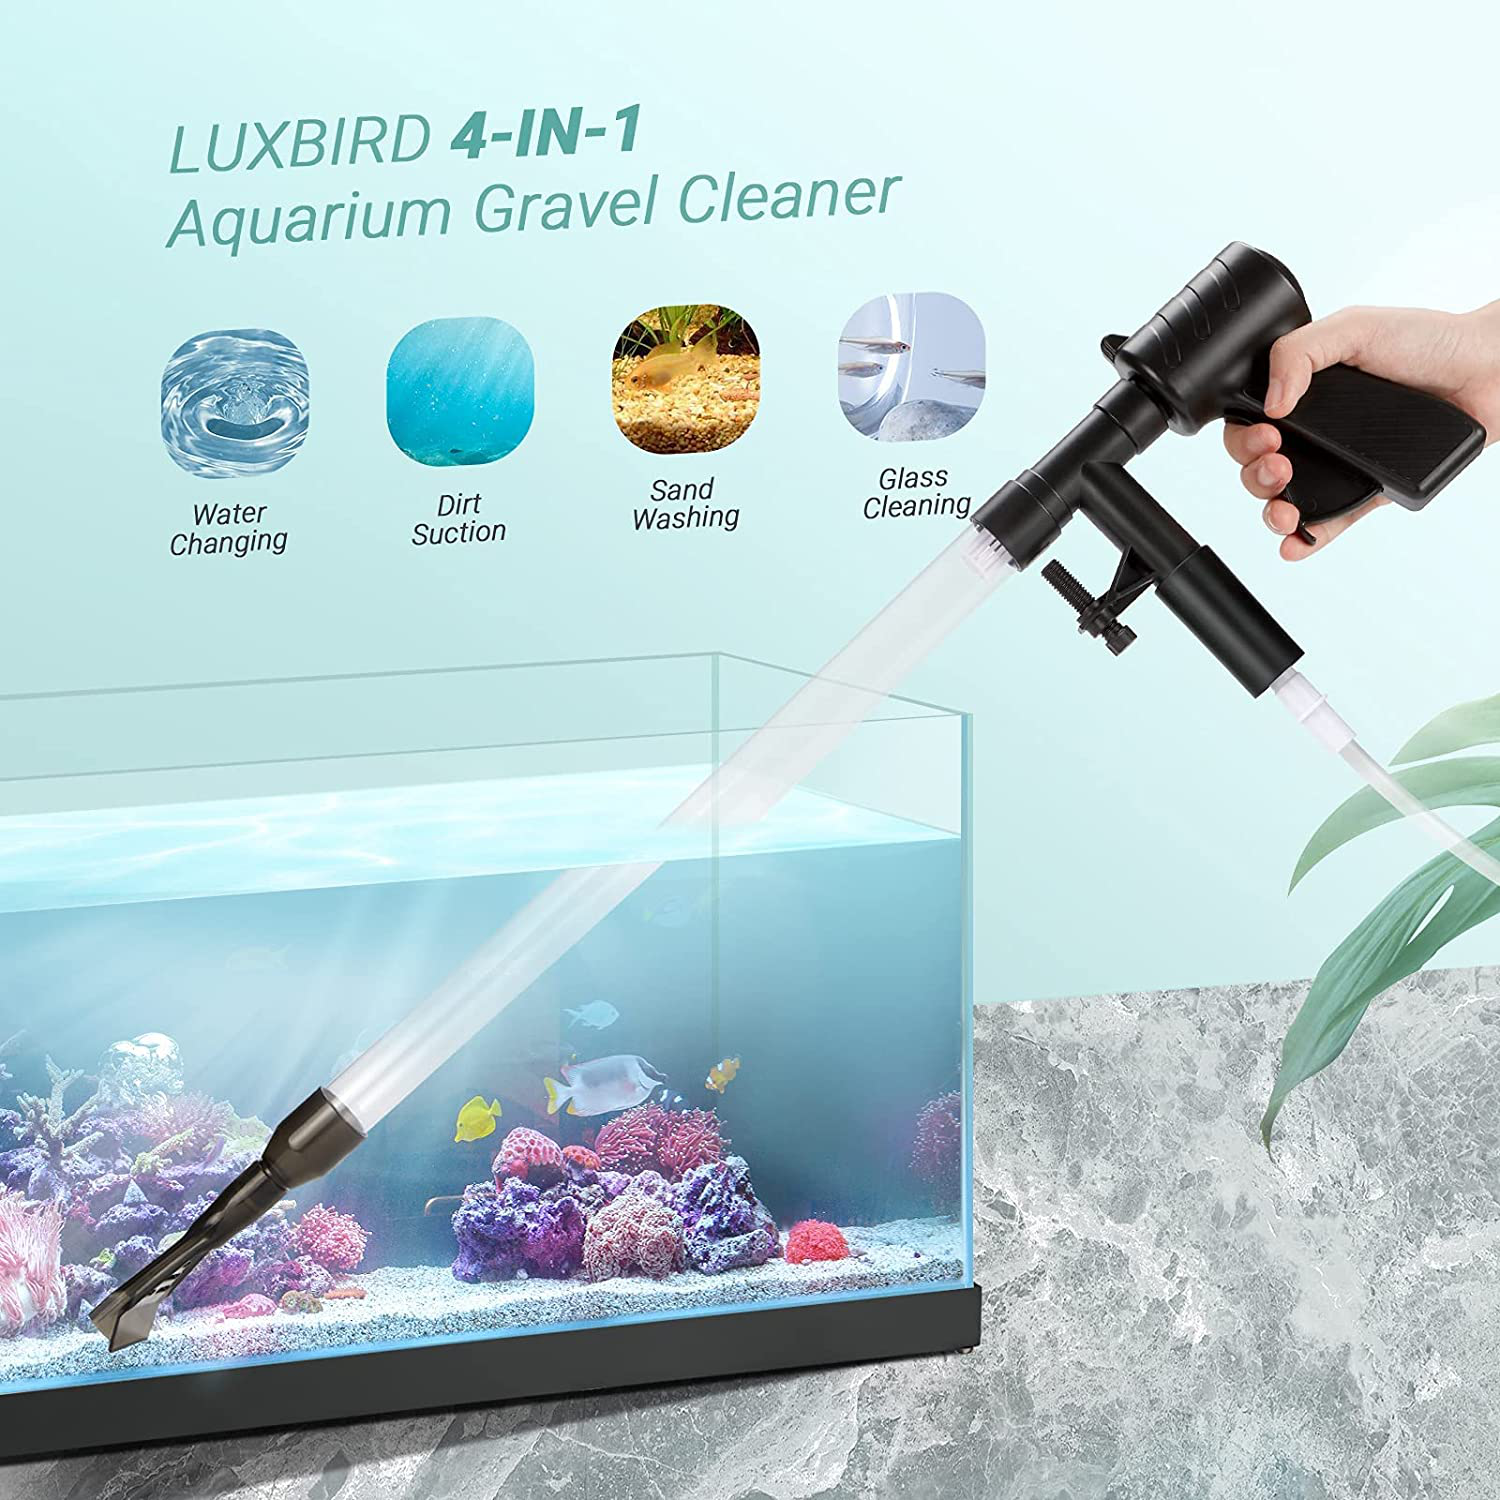 Luxbird Aquarium Gravel Cleaner New Quick Water Changer with Air-Pressure Button Fish Tank Sand Cleaner Kit Long Nozzle Water Hose Controller Clamp for Aquarium Cleaning Gravel and Sand